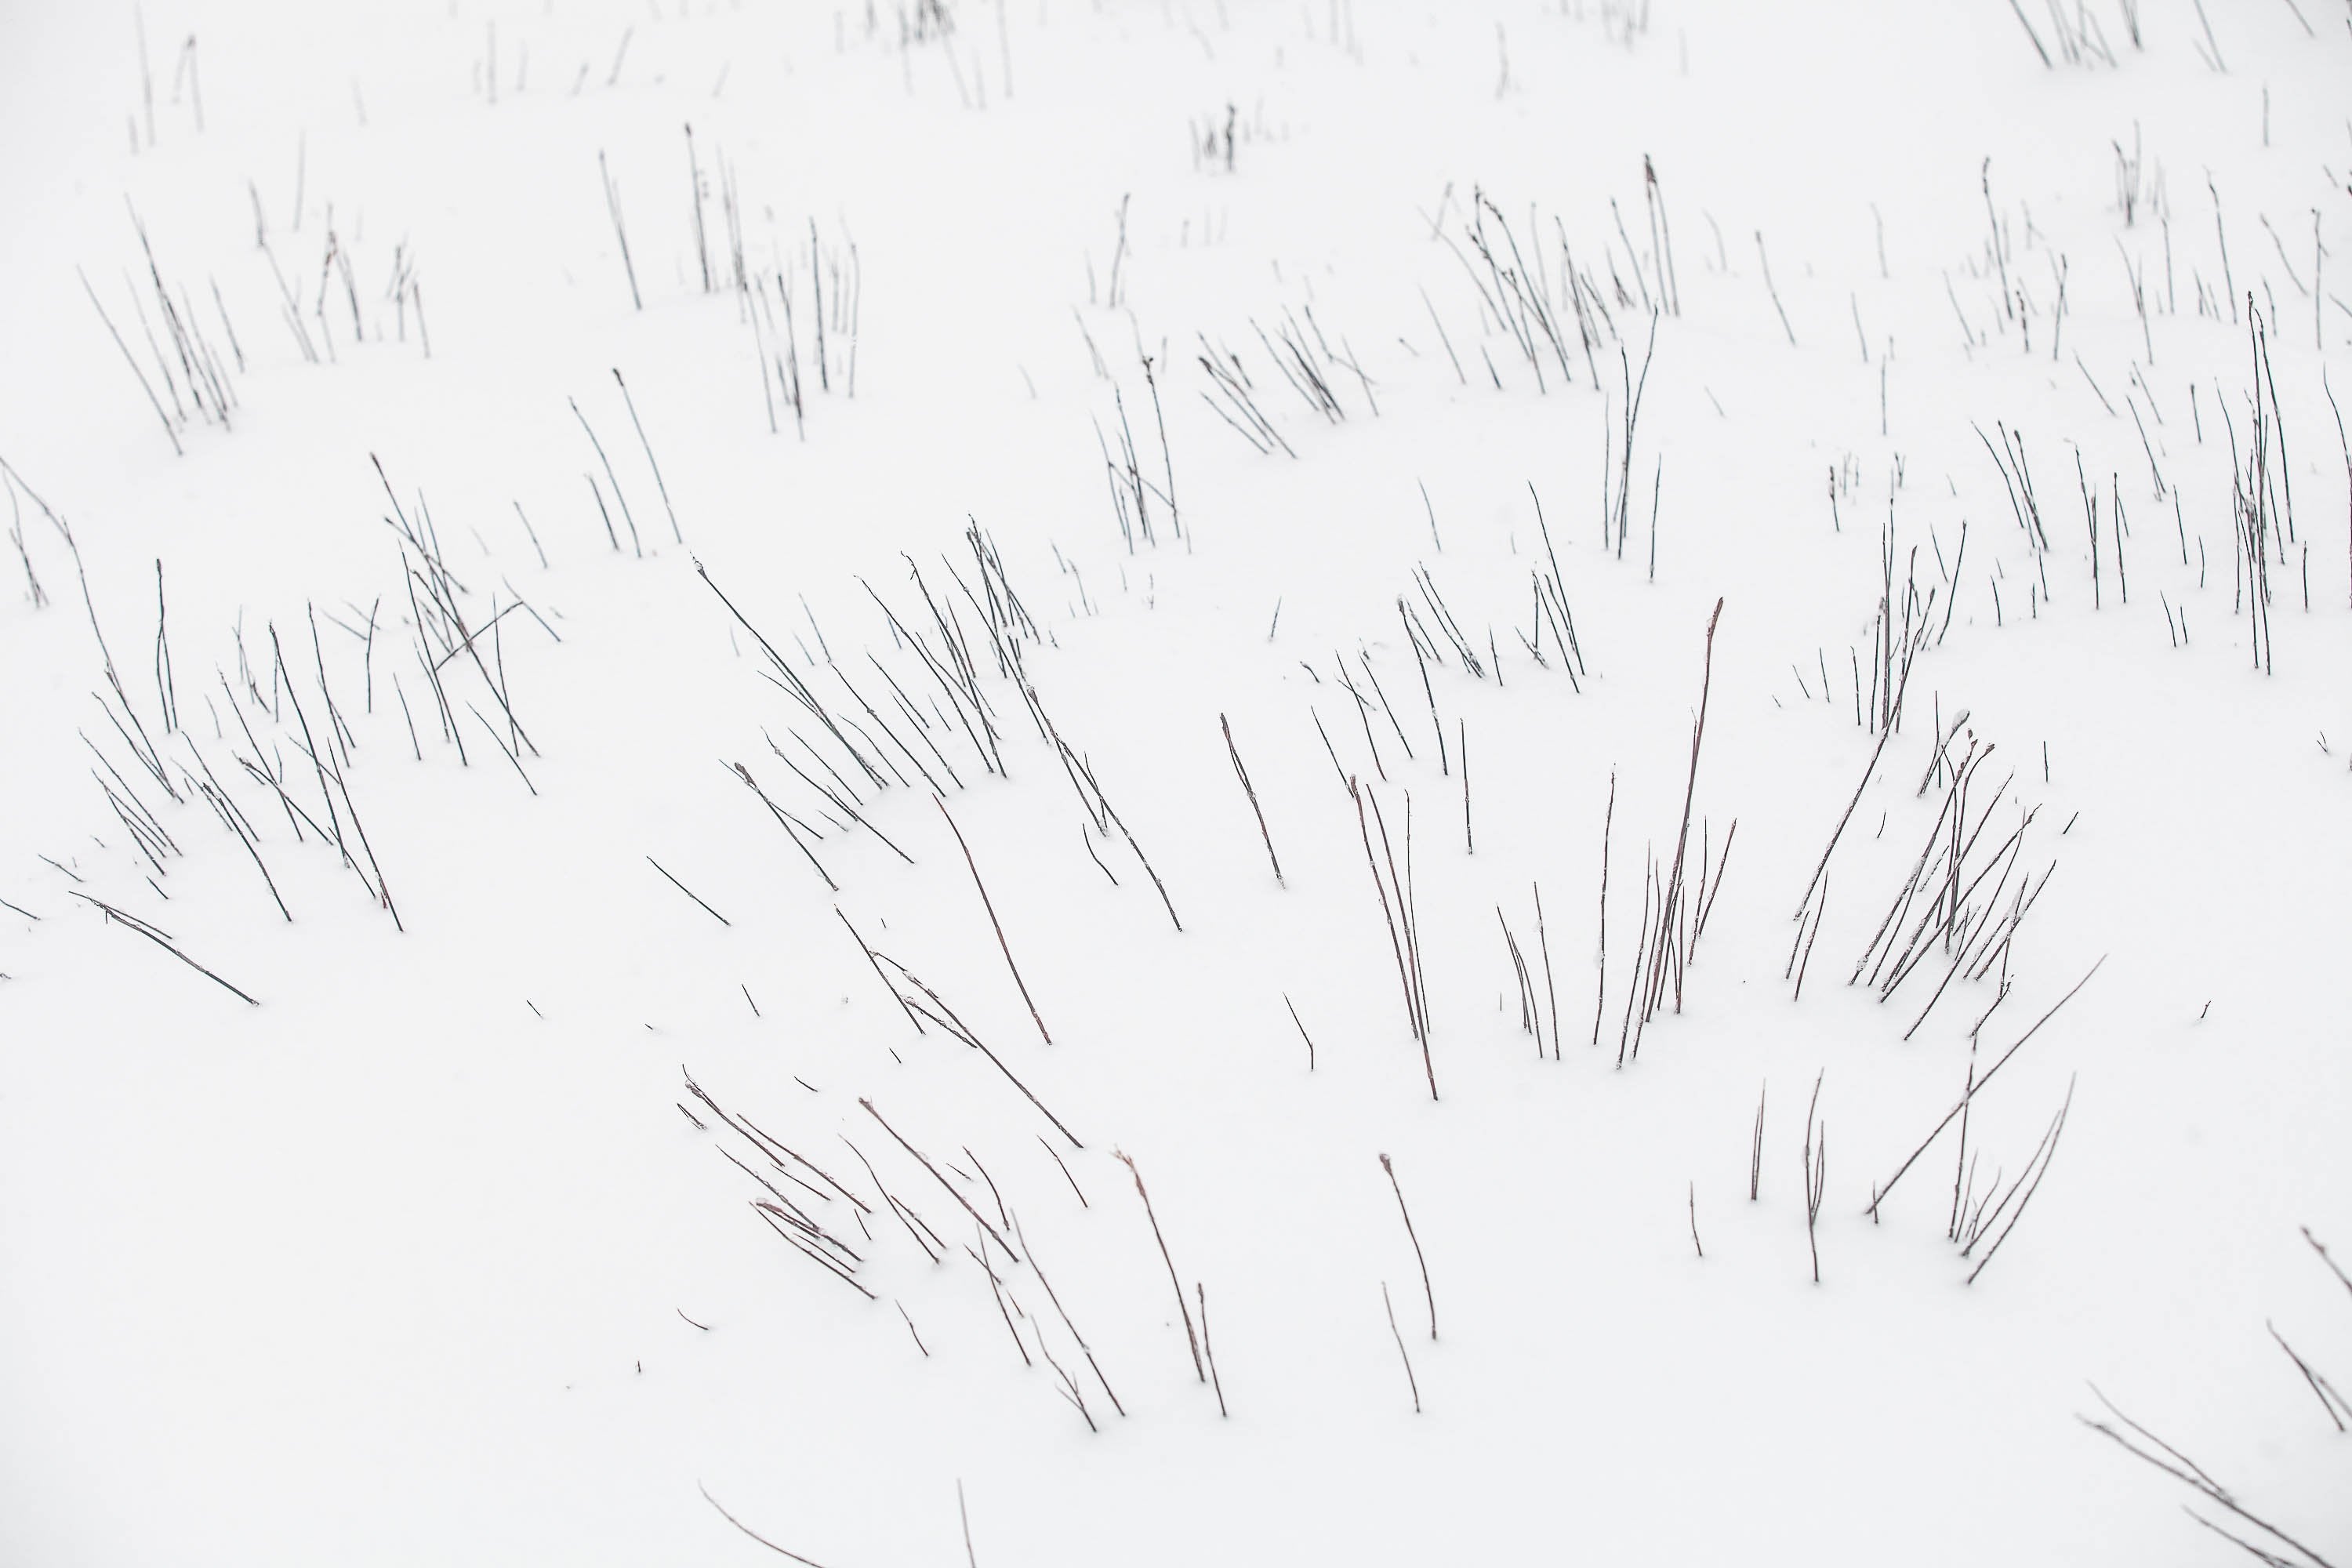 A lot of wooden sticks on a snow-covered land, Snow-Covered Buttongrass, Cradle Mountain, Tasmania